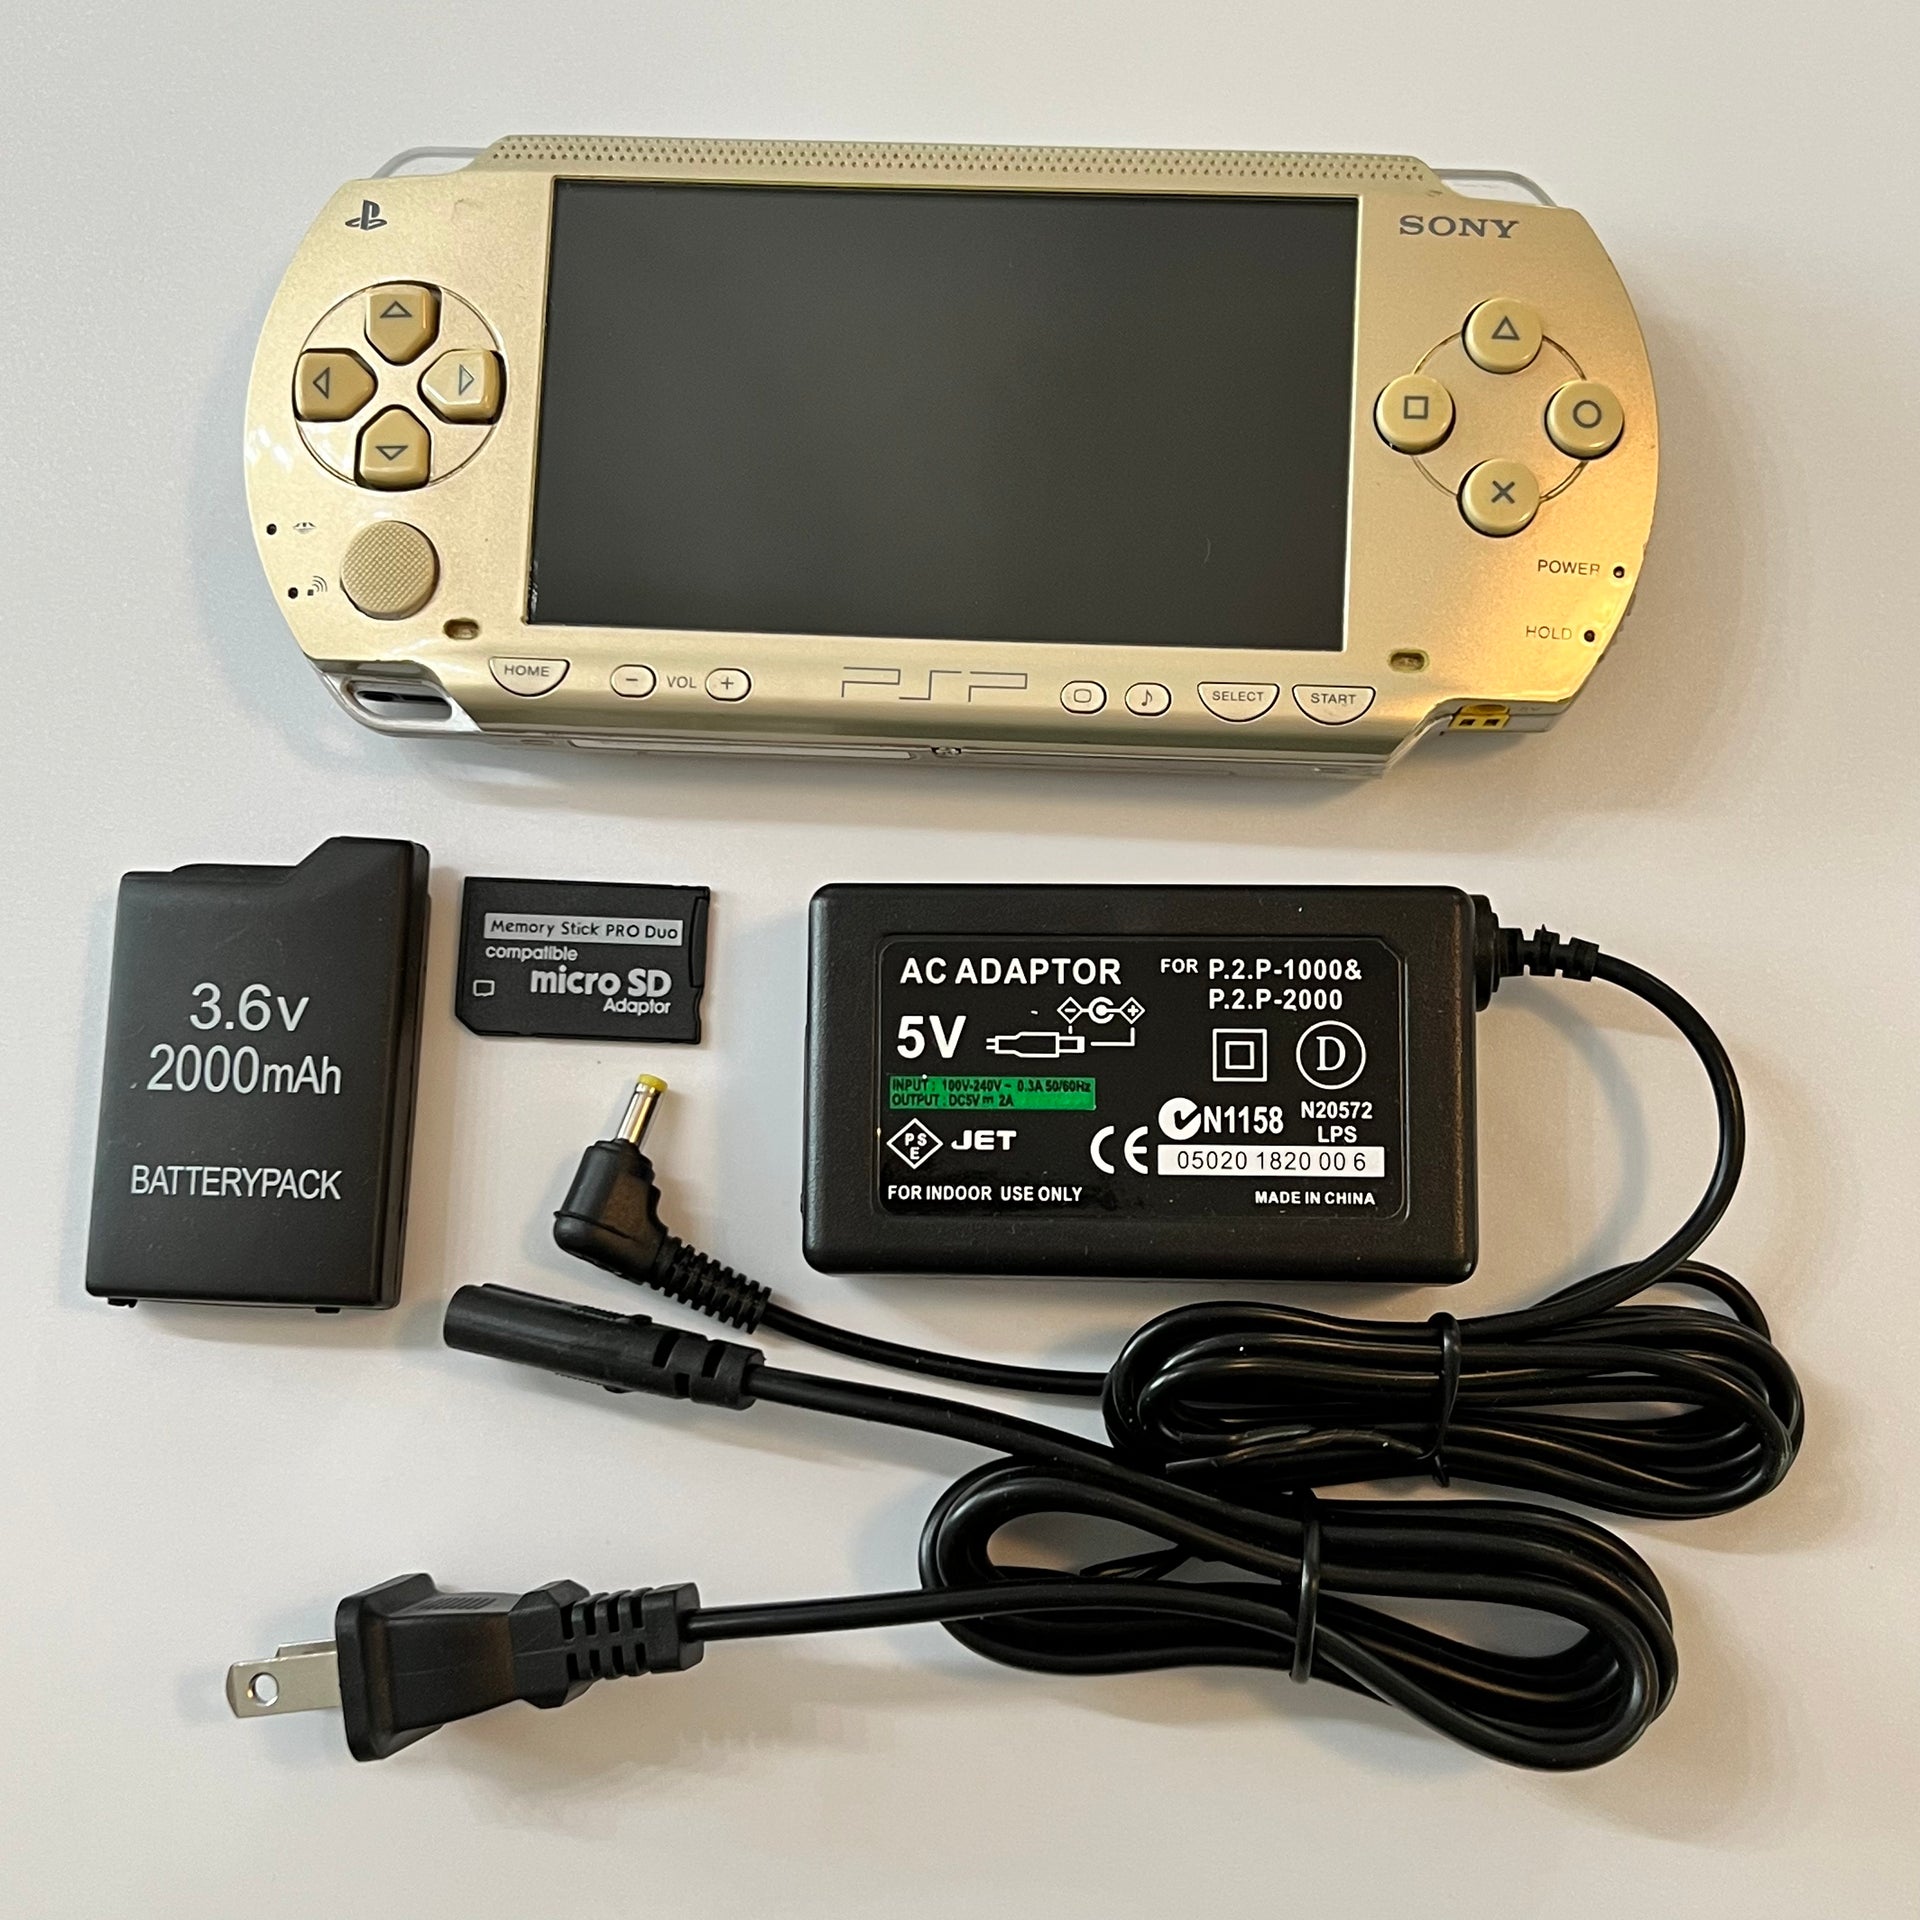 Sony PSP 1000 Launch Edition Gold Champagne Handheld System for